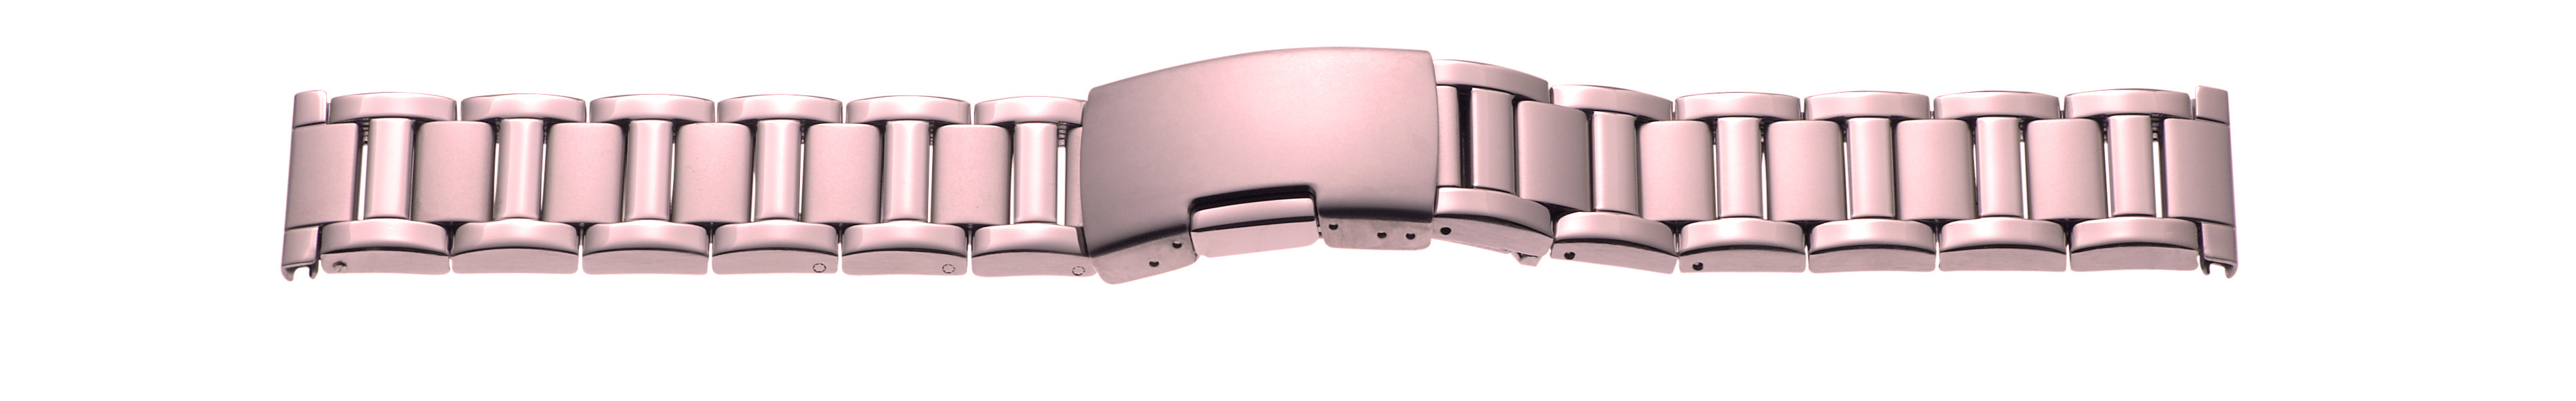 Metal band, stainless steel, 22 mm, rosegold, PVD, polished / brushed